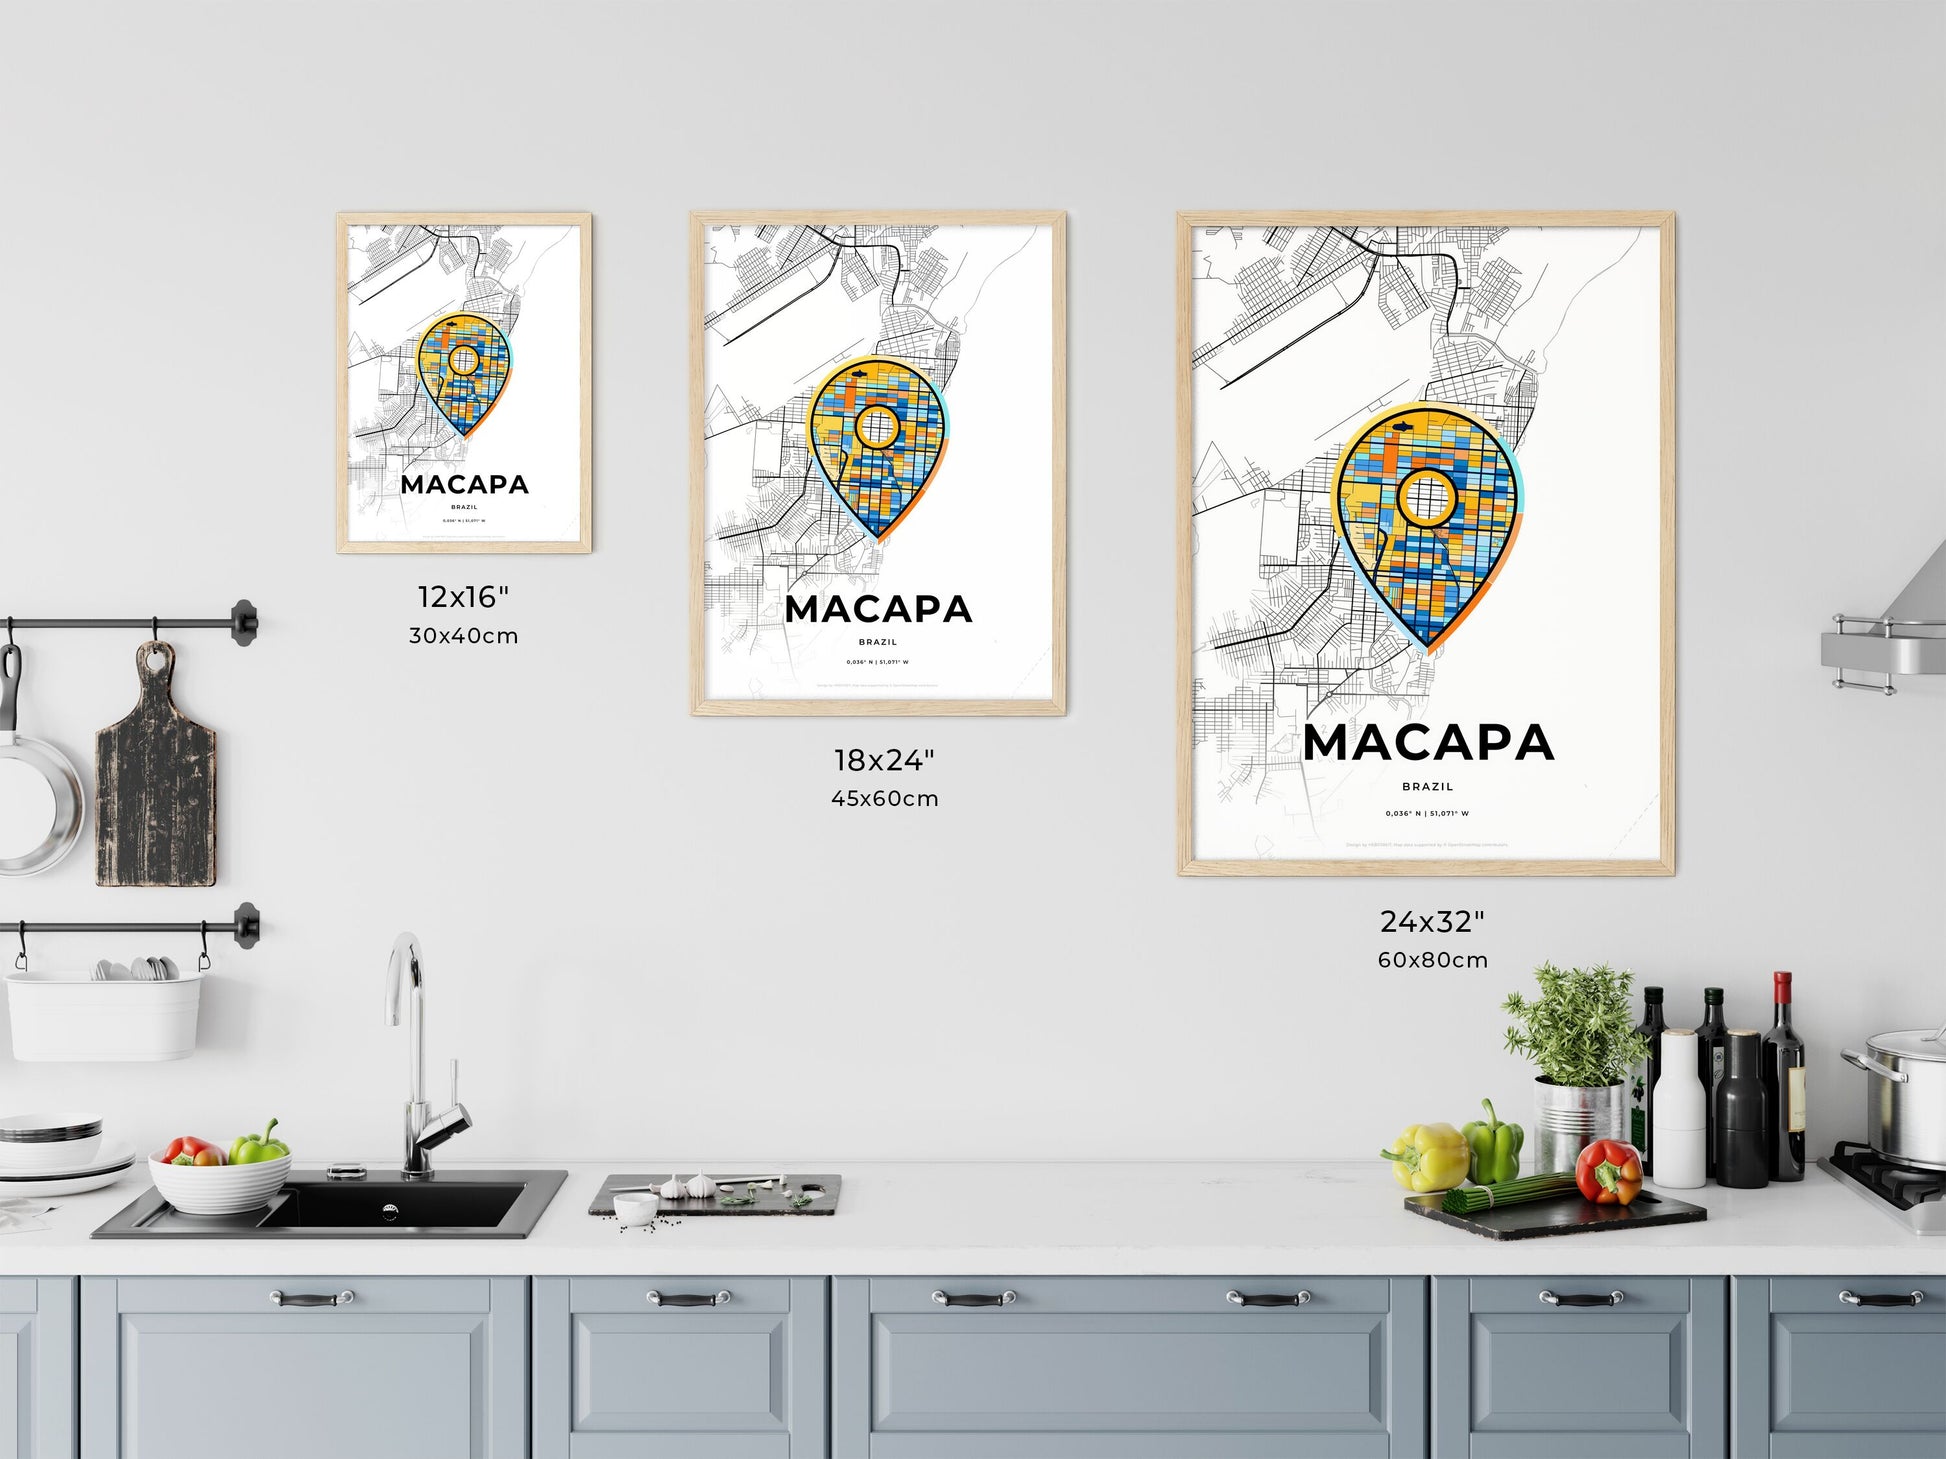 MACAPA BRAZIL minimal art map with a colorful icon. Where it all began, Couple map gift.